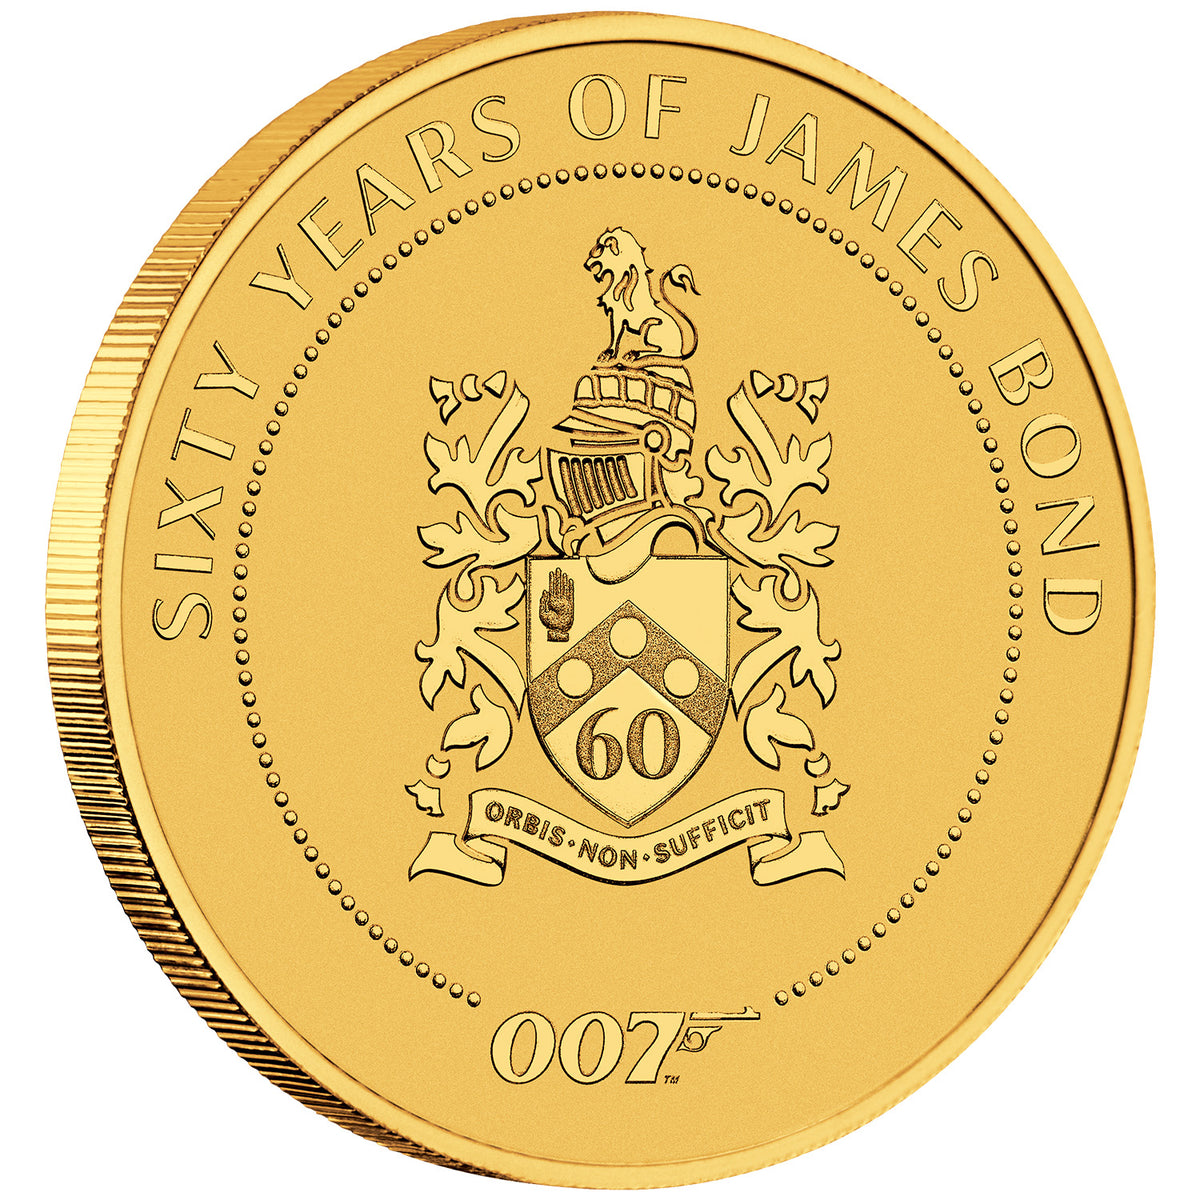 James Bond Family Crest 60th Anniversary 1oz Gold Coin - By The Perth Mint